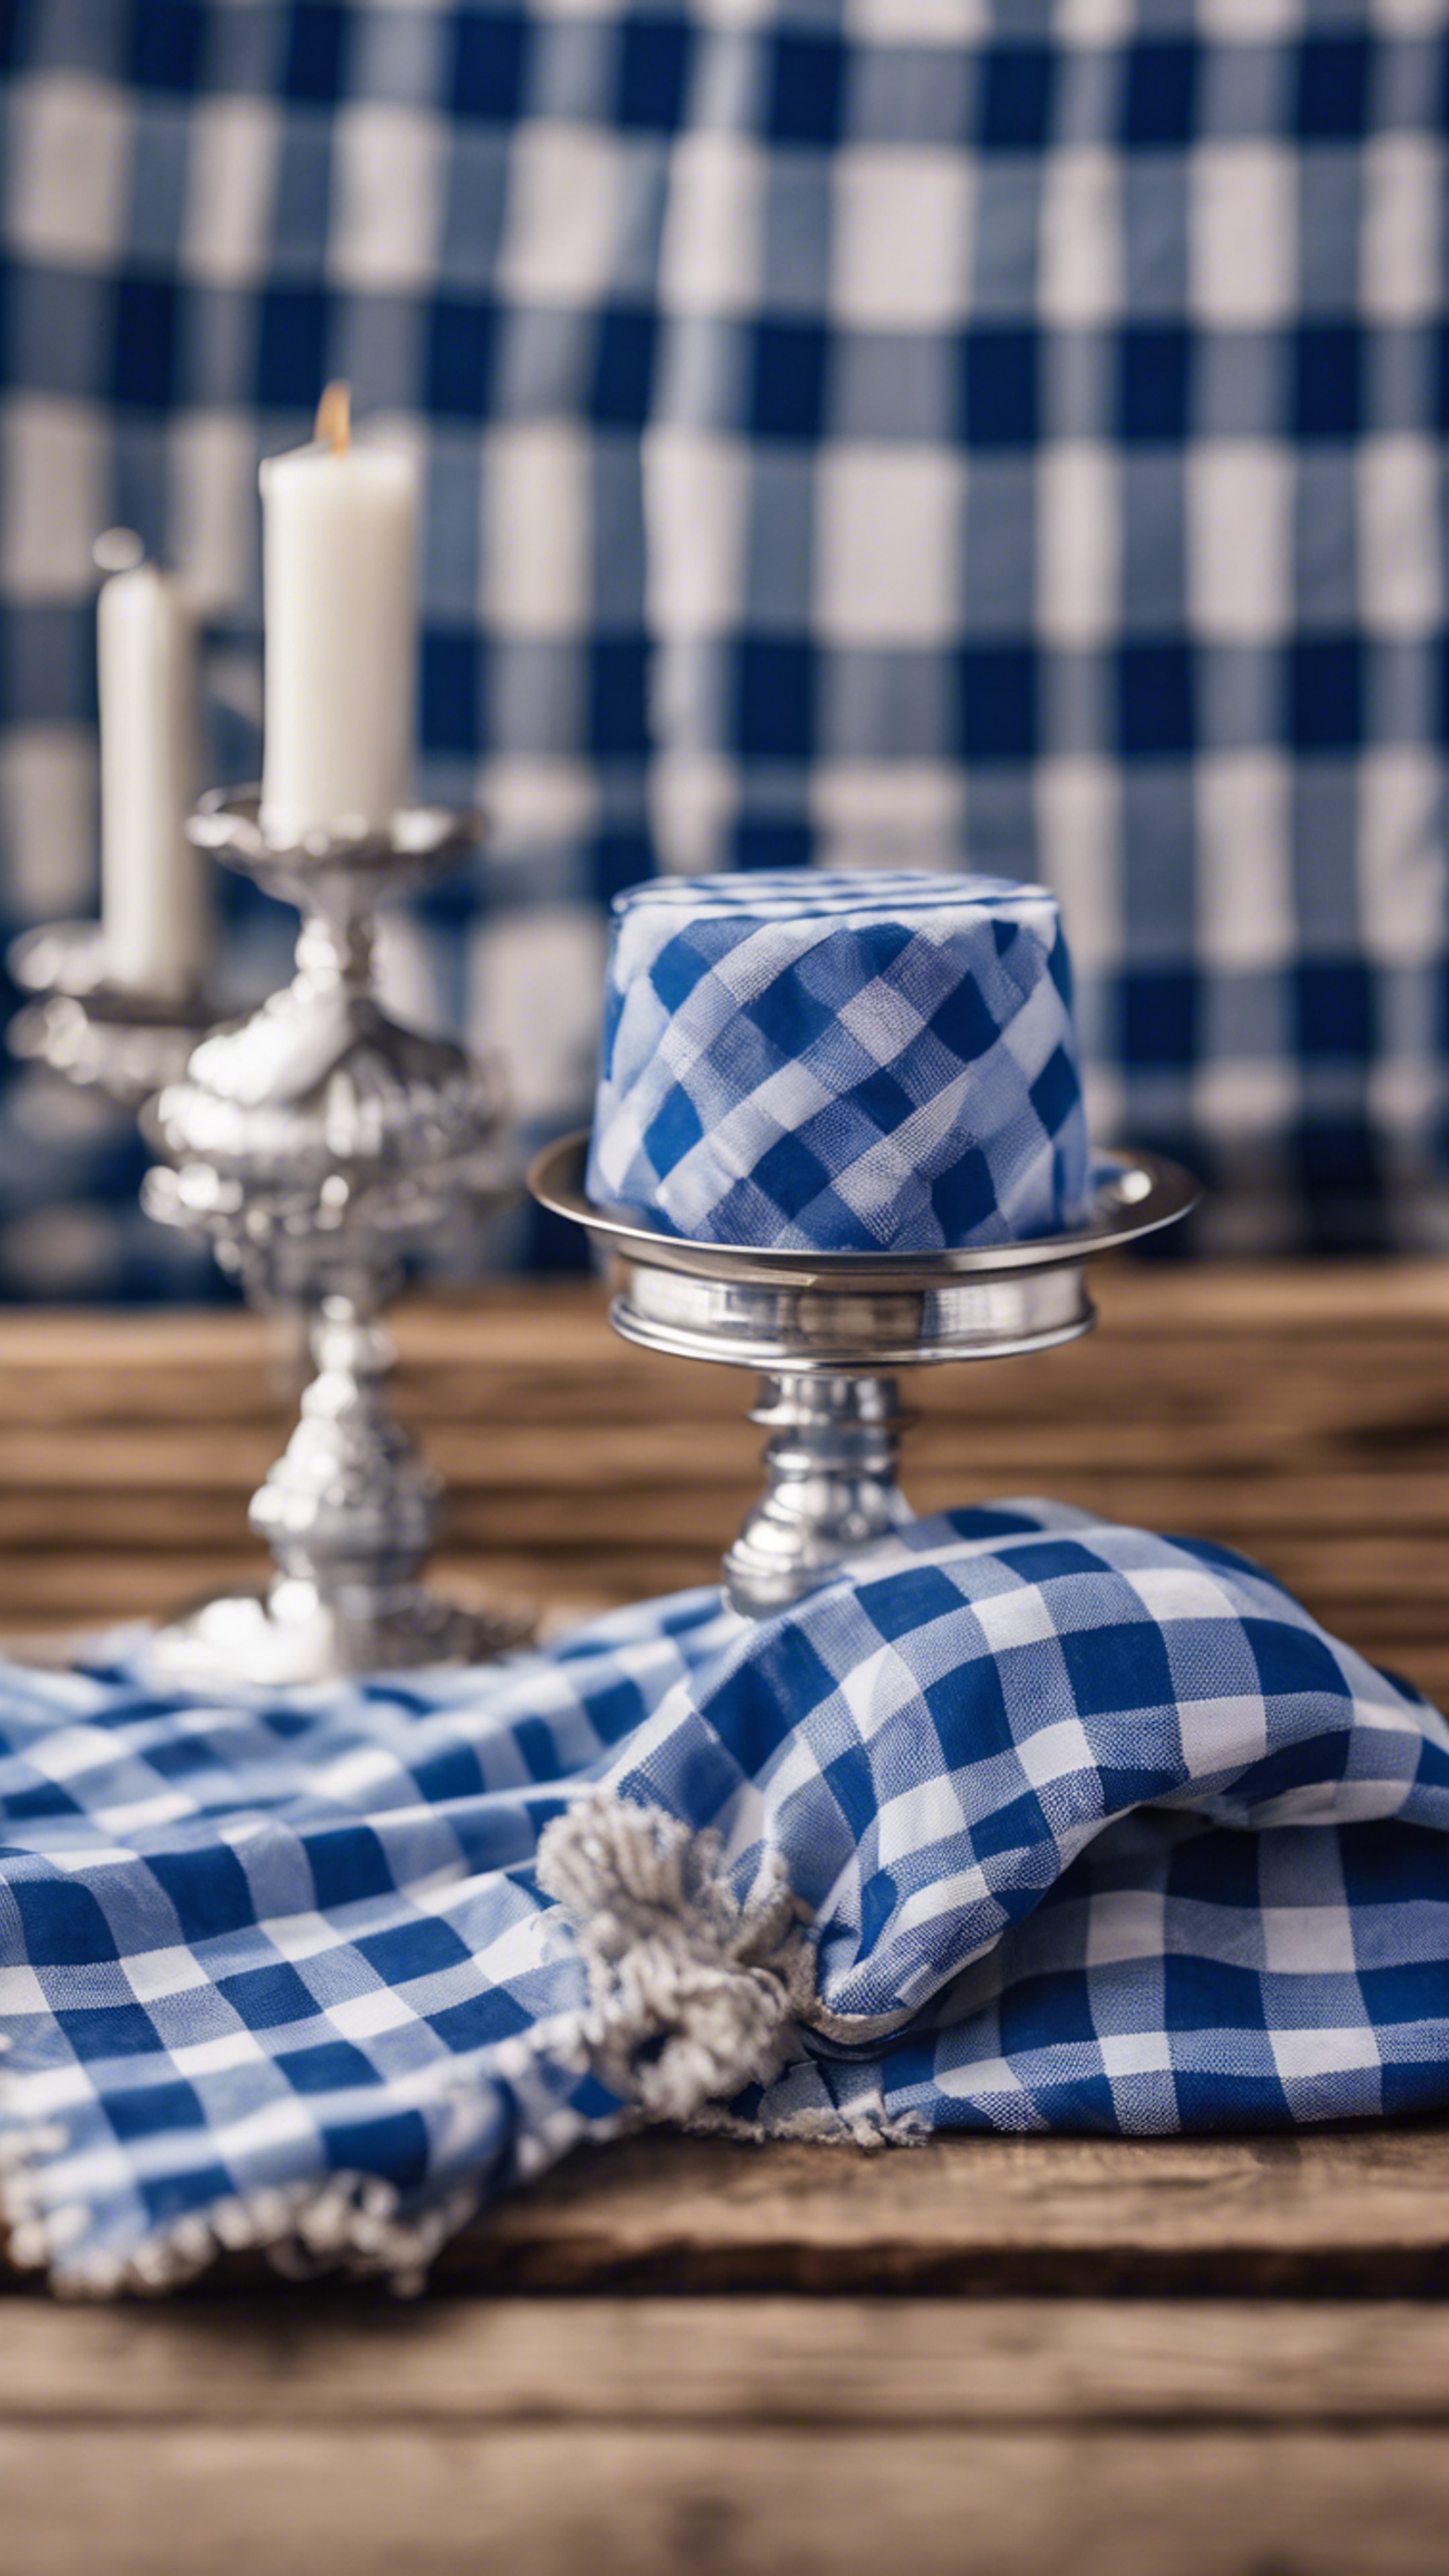 Classic blue checkered gingham fabric draped over a wooden table with a silver candelabra, evoking a preppy picnic scene. Wallpaper[5483729deeeb4e2a9f91]